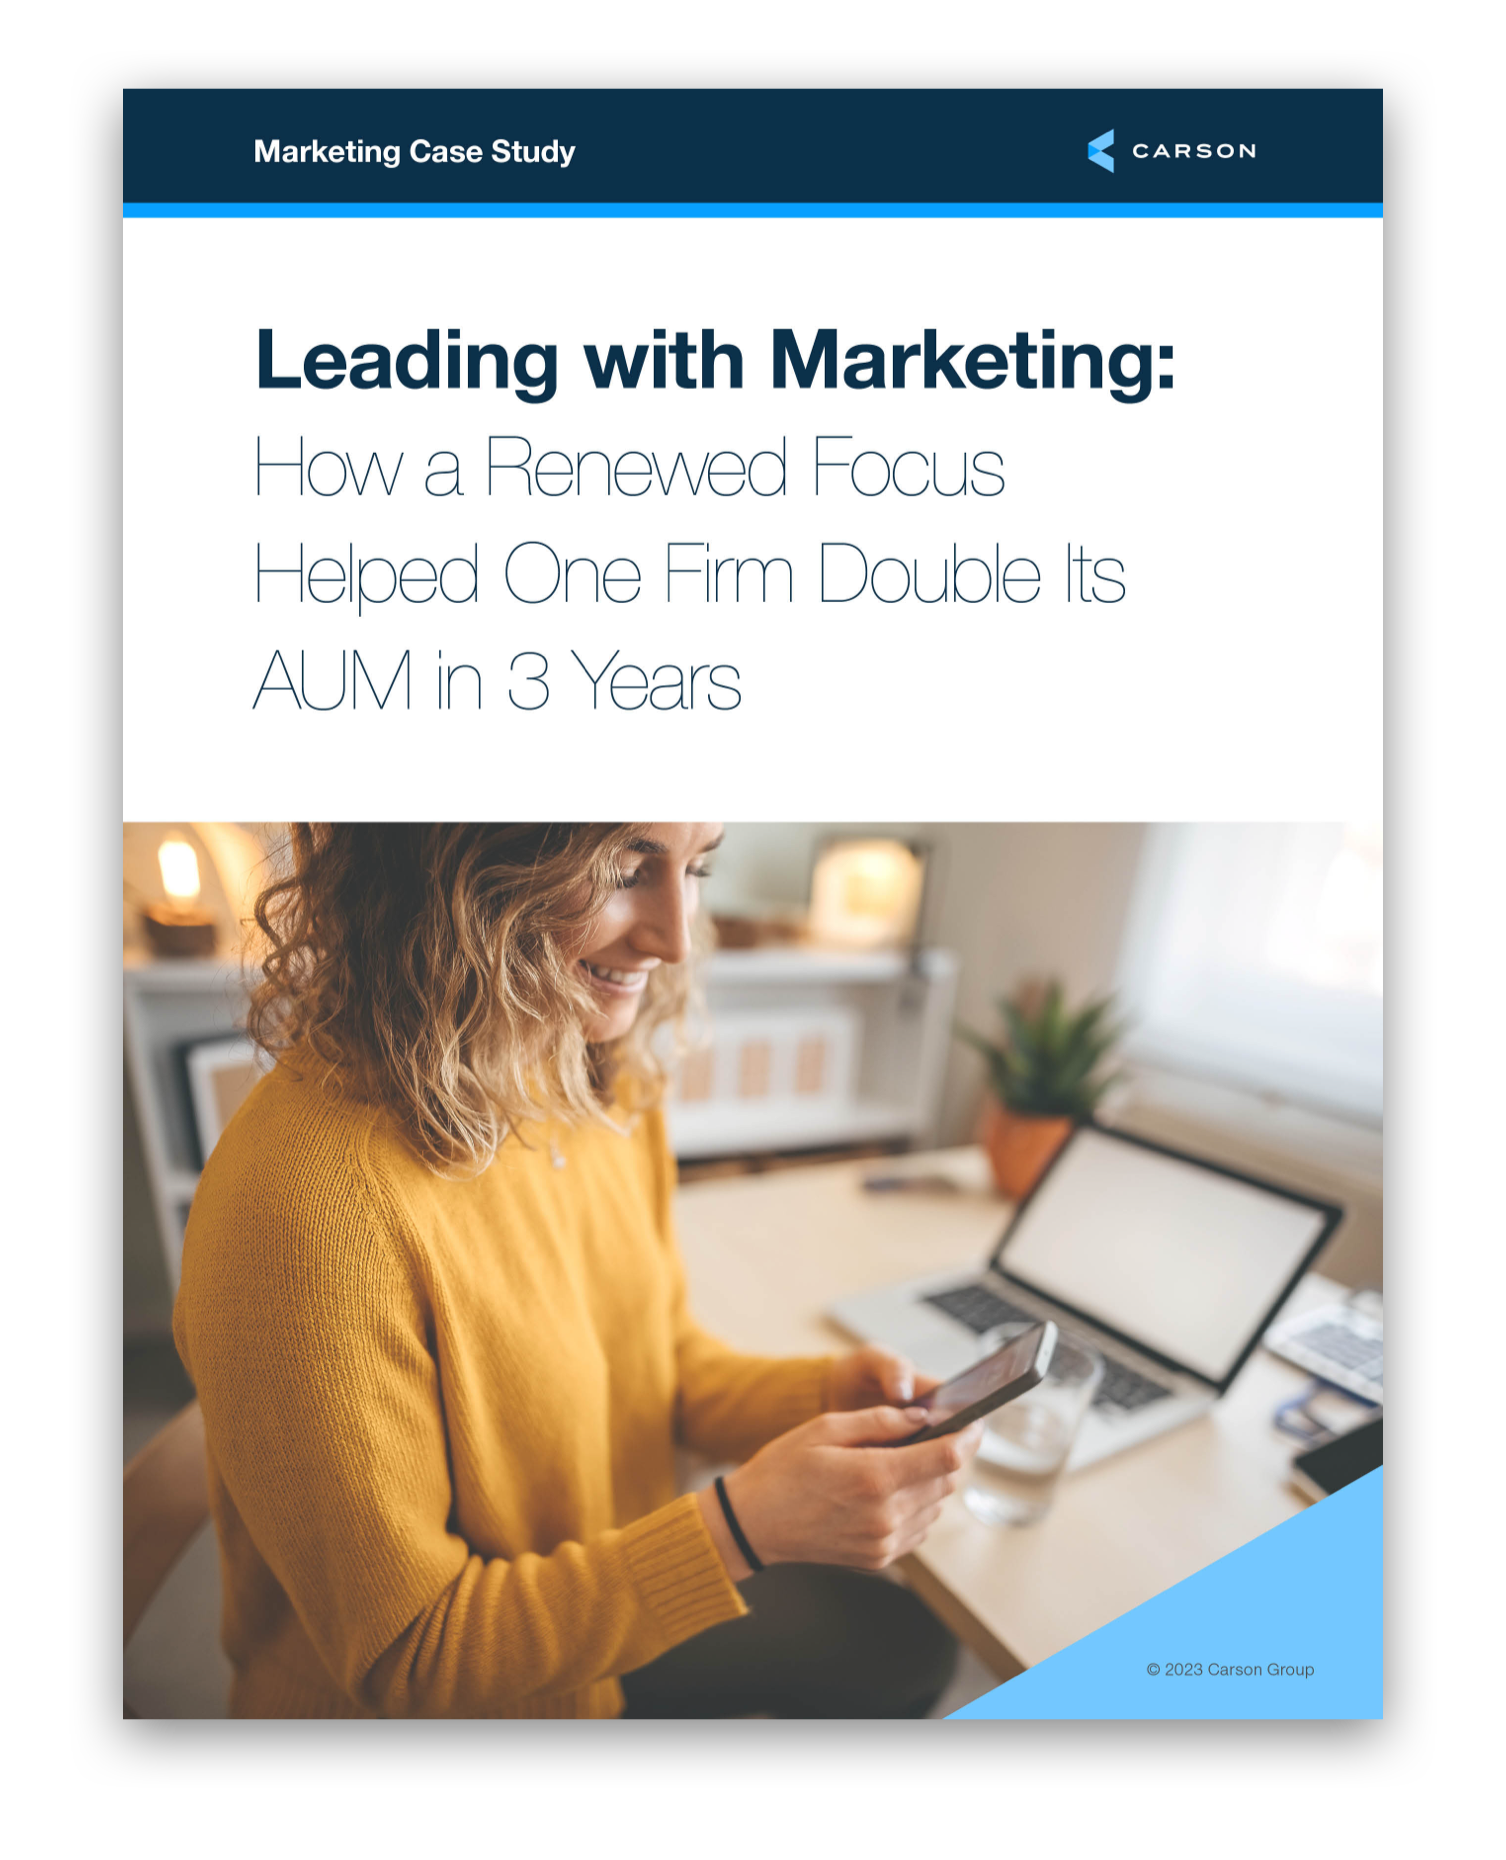 Leading with Marketing: How a Renewed Focus Helped One Firm Double Its AUM in 3 Years